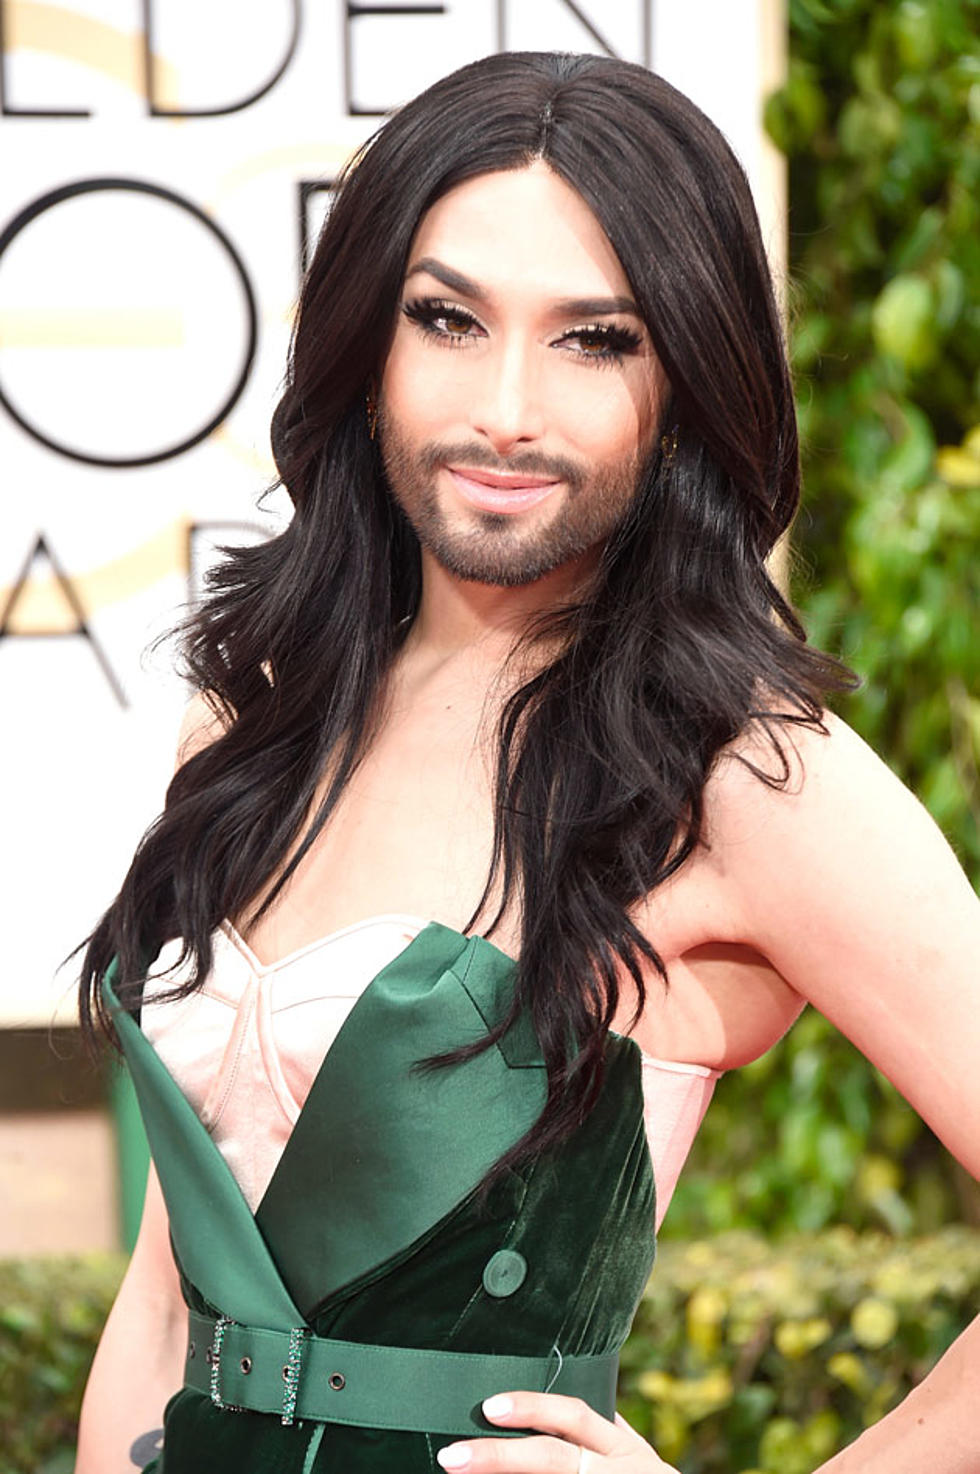 Who Is Conchita Wurst, the Bearded Woman at the 2015 Golden Globes?